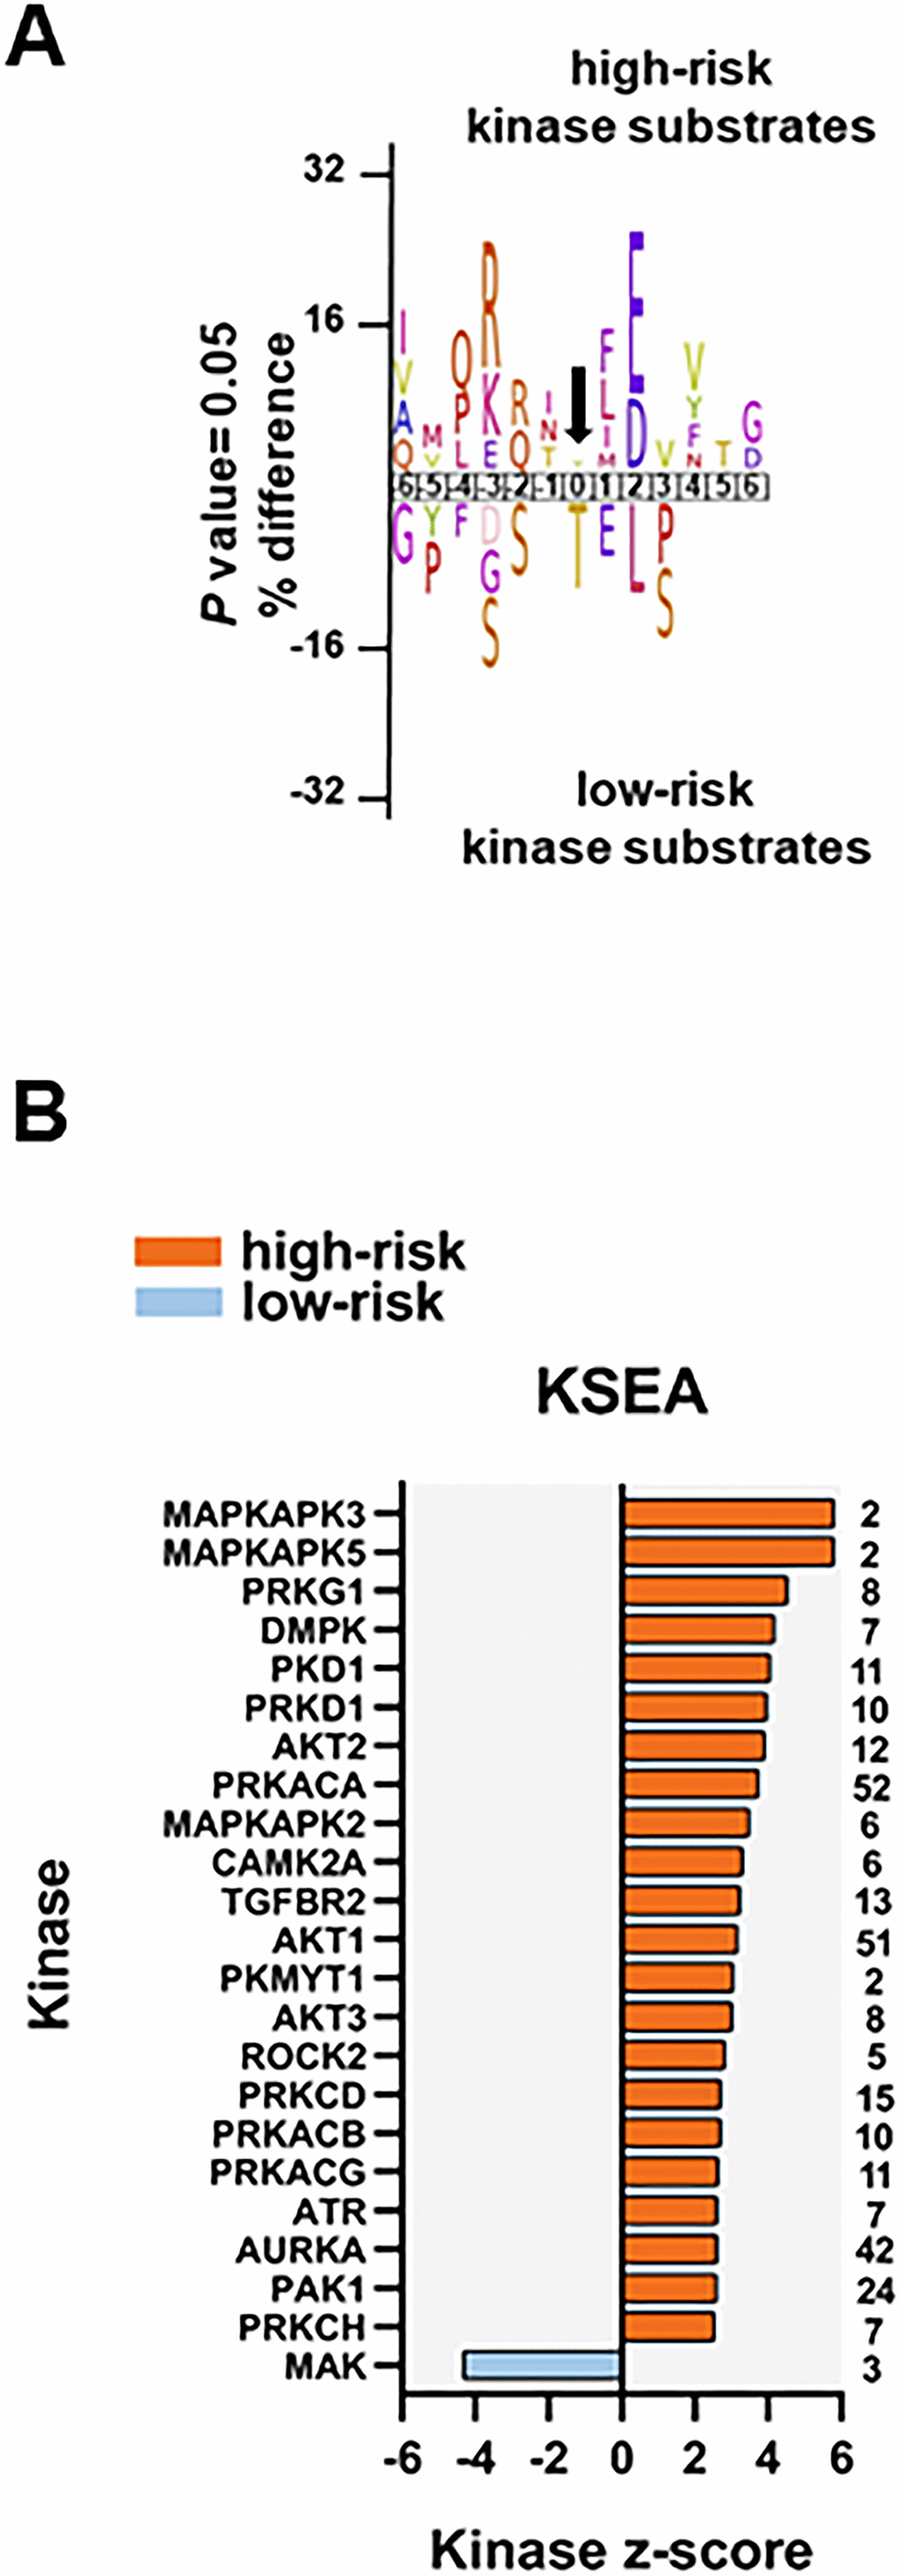 Kinase prediction analysis of the high-risk vs low-risk phosphoproteome. (A) Sequence motif analysis of the ± six amino acids flanking the differentially regulated phosphorylation sites for either group. (B) KSEA of differentially regulated and unregulated phosphorylation sites. The kinase z-score (x-axis) is the normalized score for each kinase (y-axis), weighted by the number of identified substrates indicated on the right side of the plot. Significant predicted kinases with FDR 